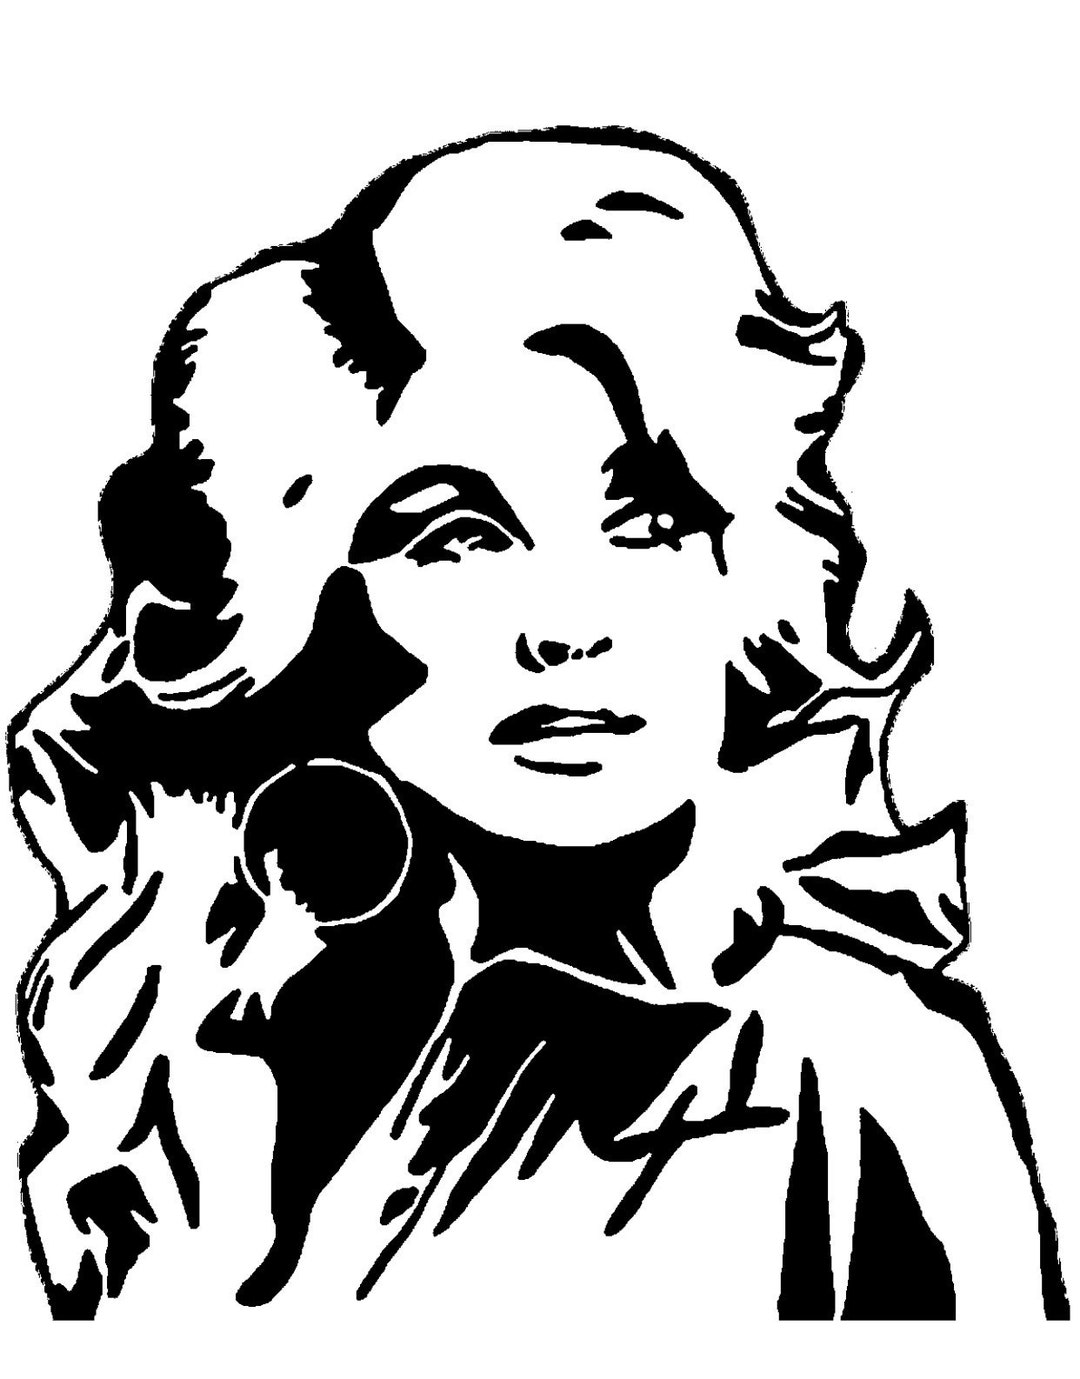 Dolly Parton Silhouette Glass - Etsy